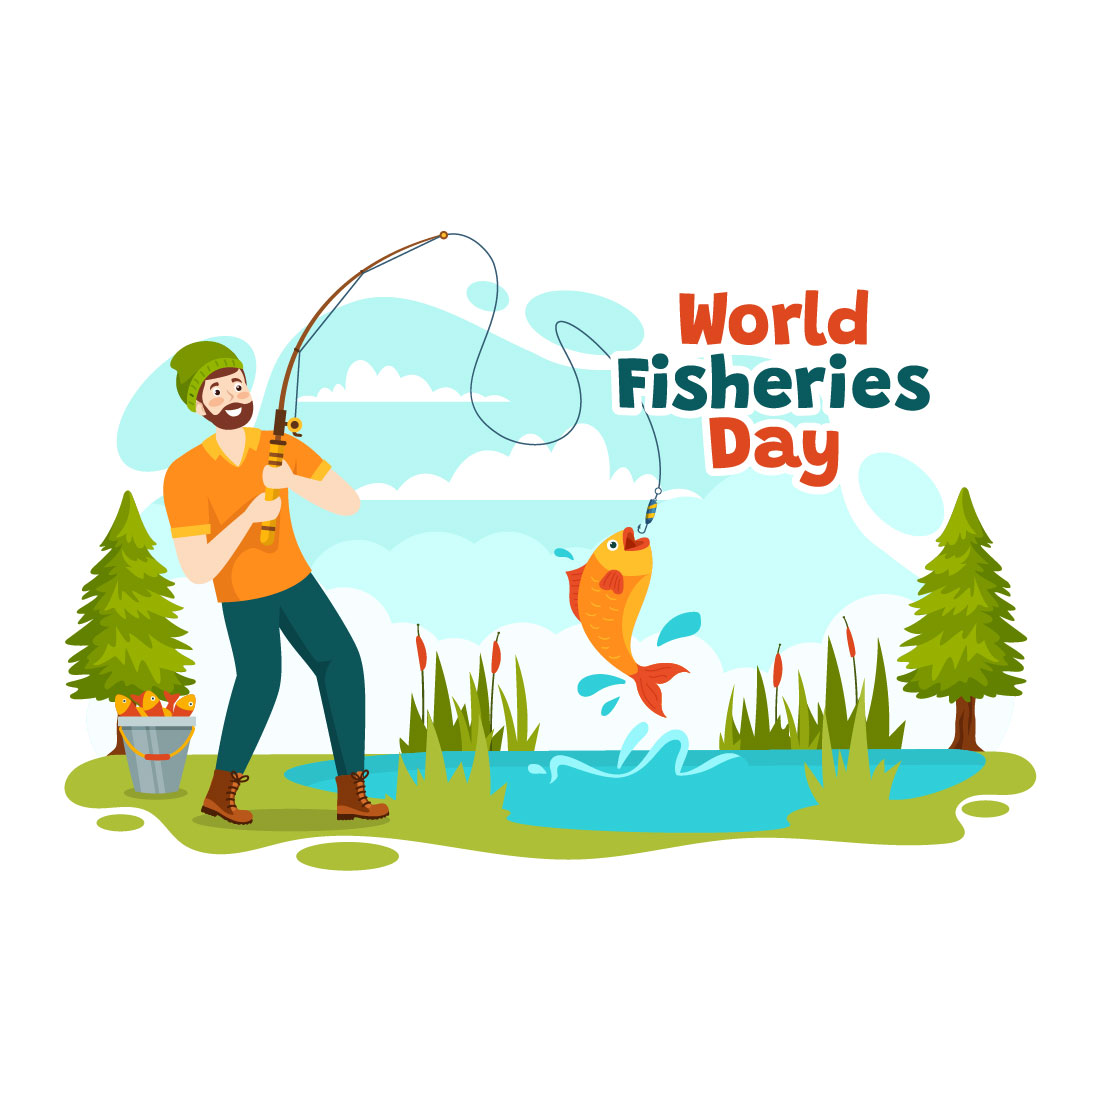 10 World Fisheries Day Illustration cover image.